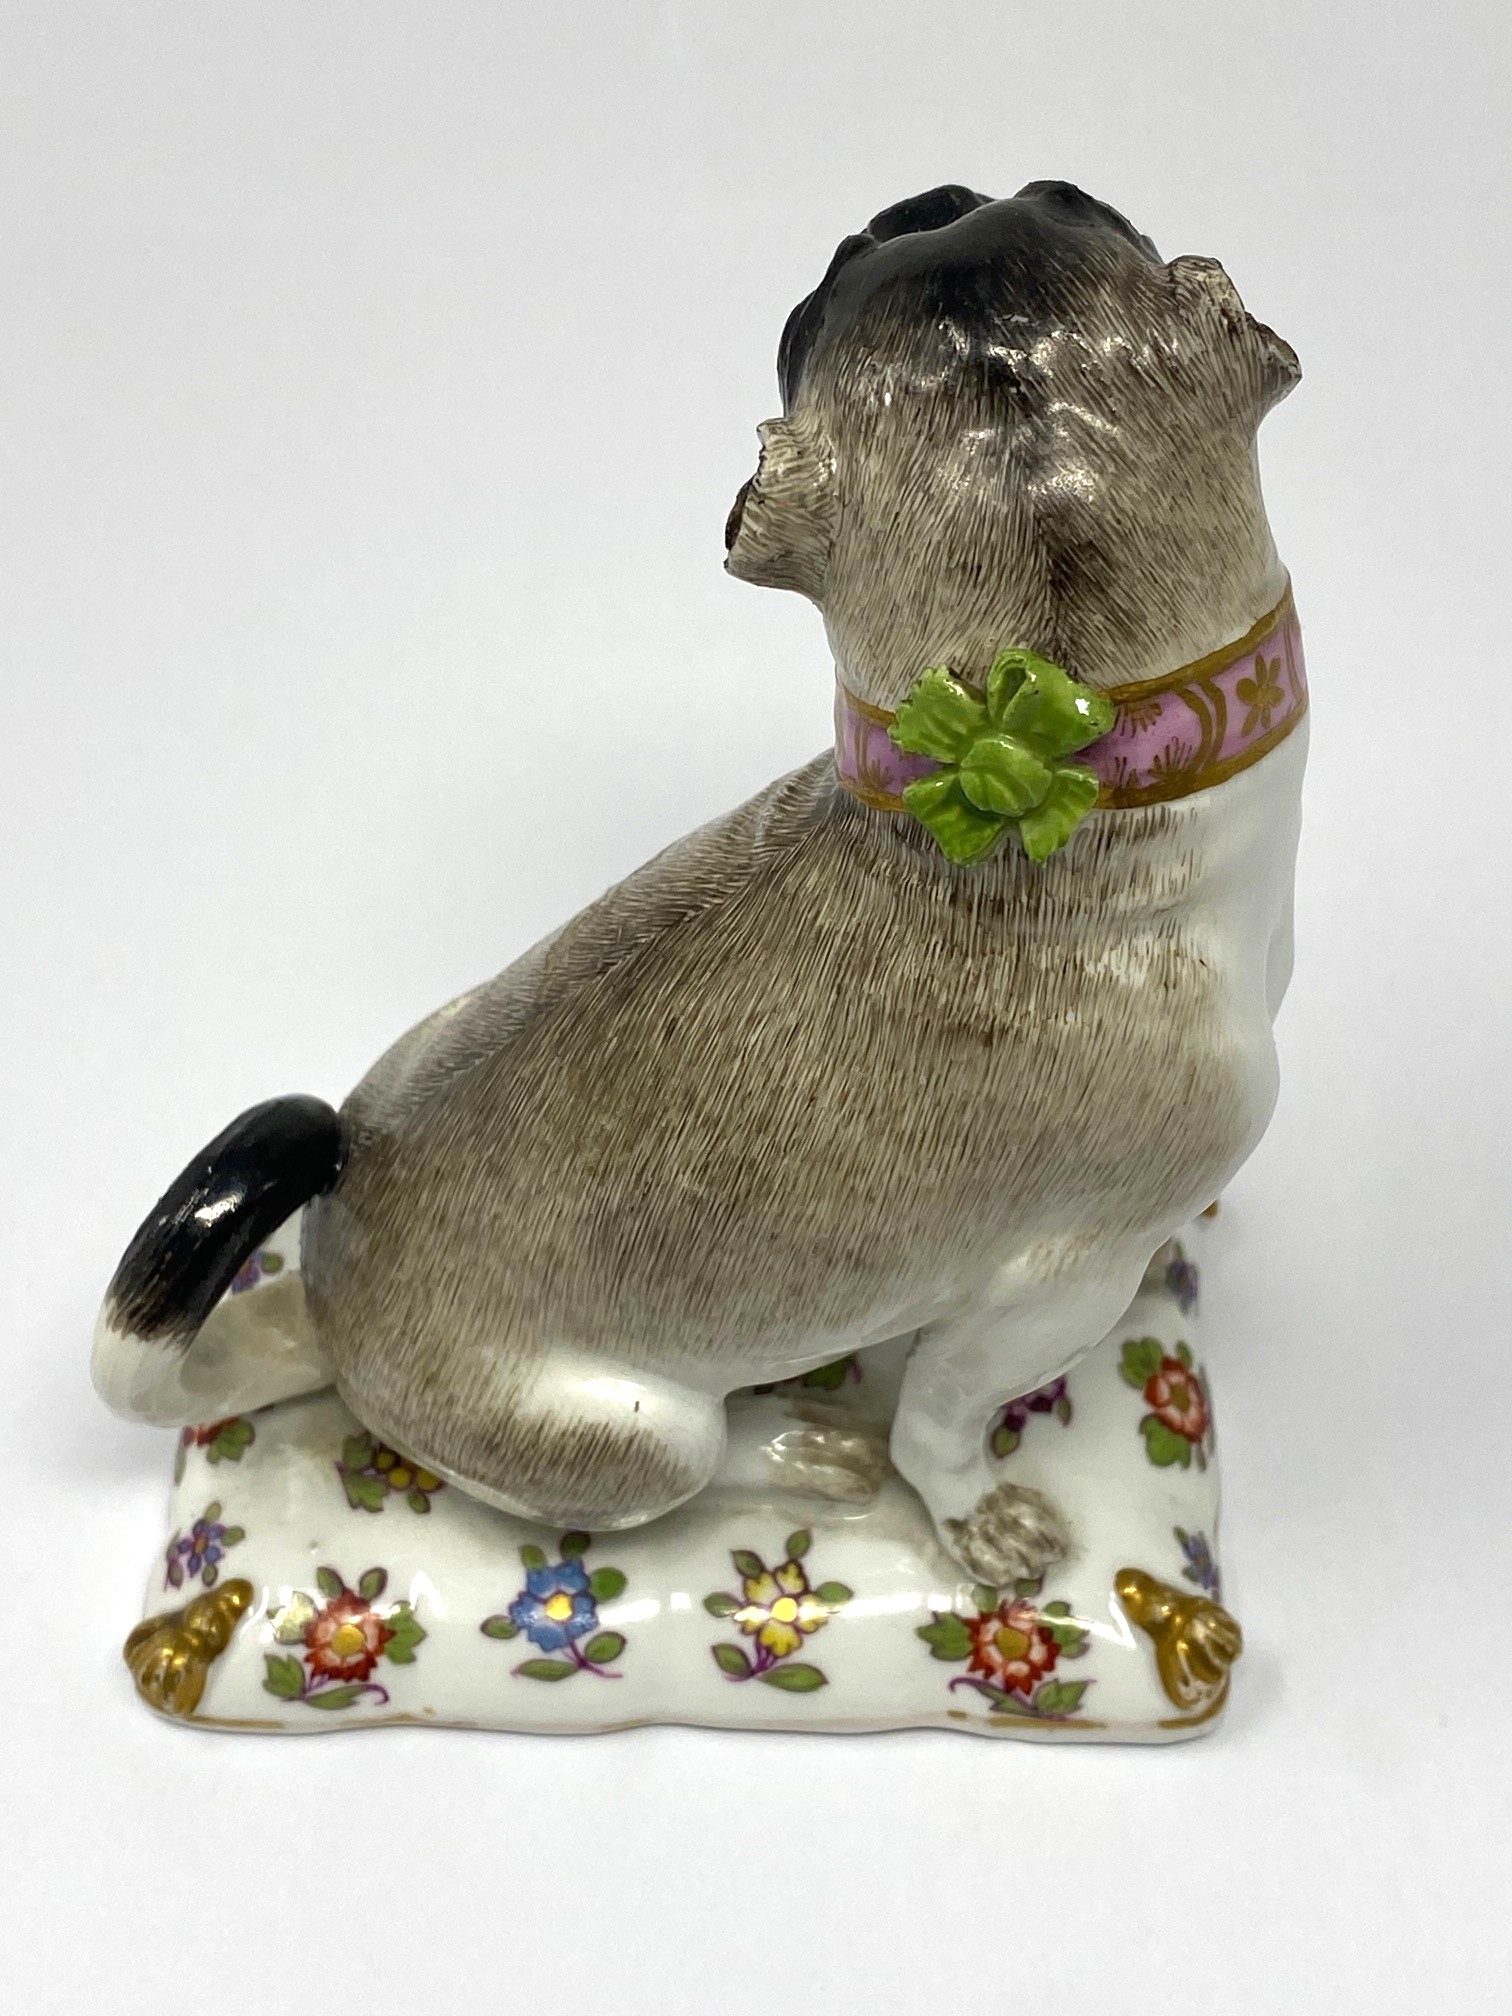 A MEISSEN FIGURE OF A PUG, MID 18TH CENTURY - Image 4 of 6